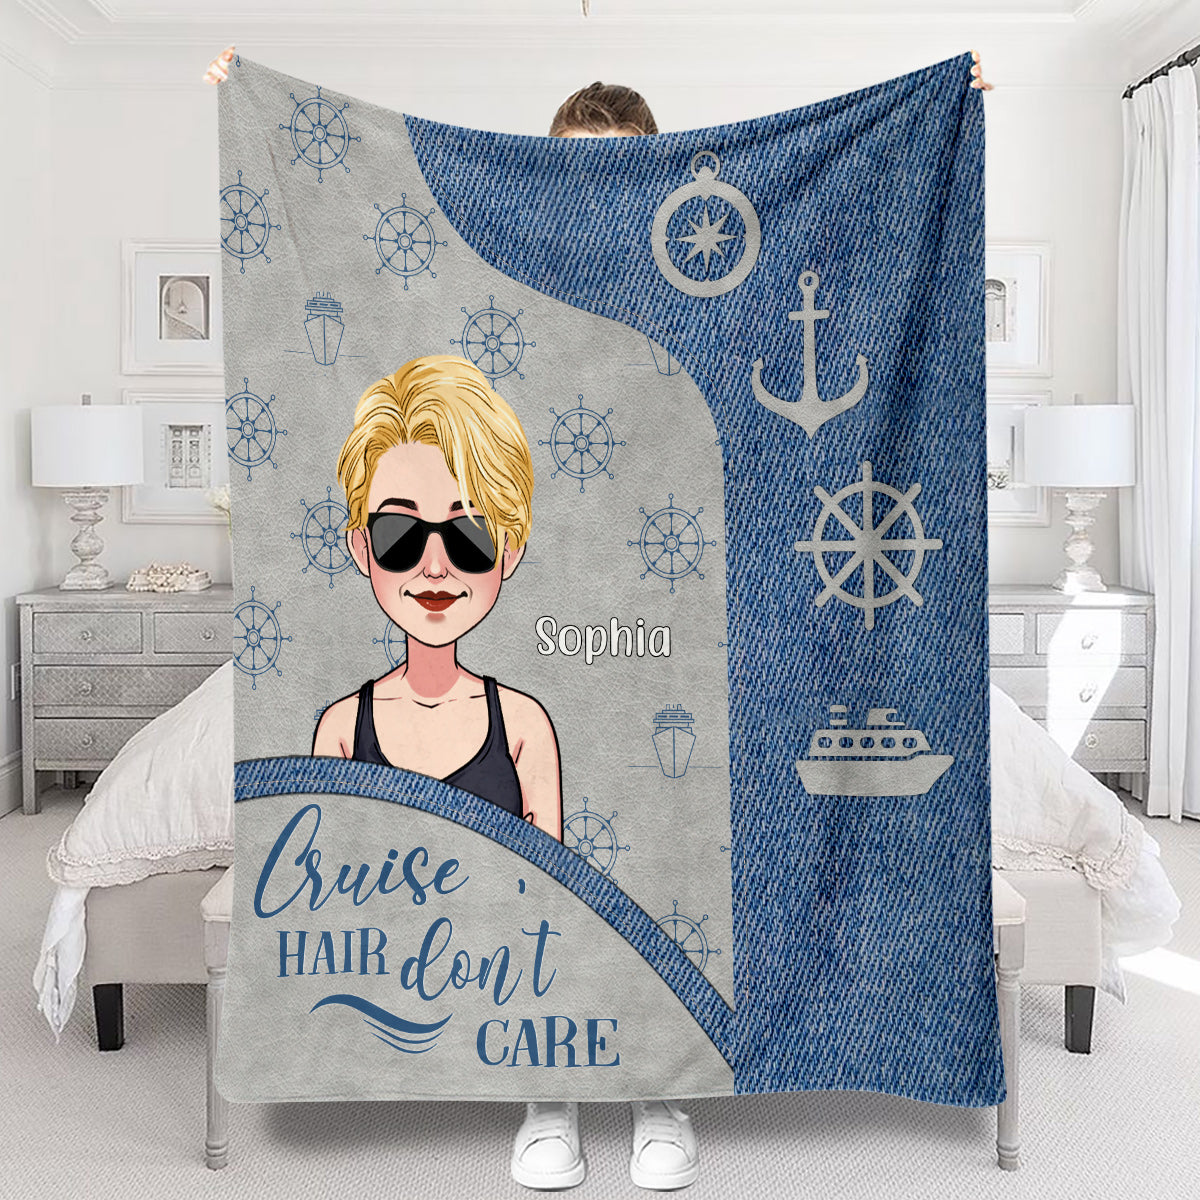 Cruise Hair Don't Care - Personalized Cruising Blanket